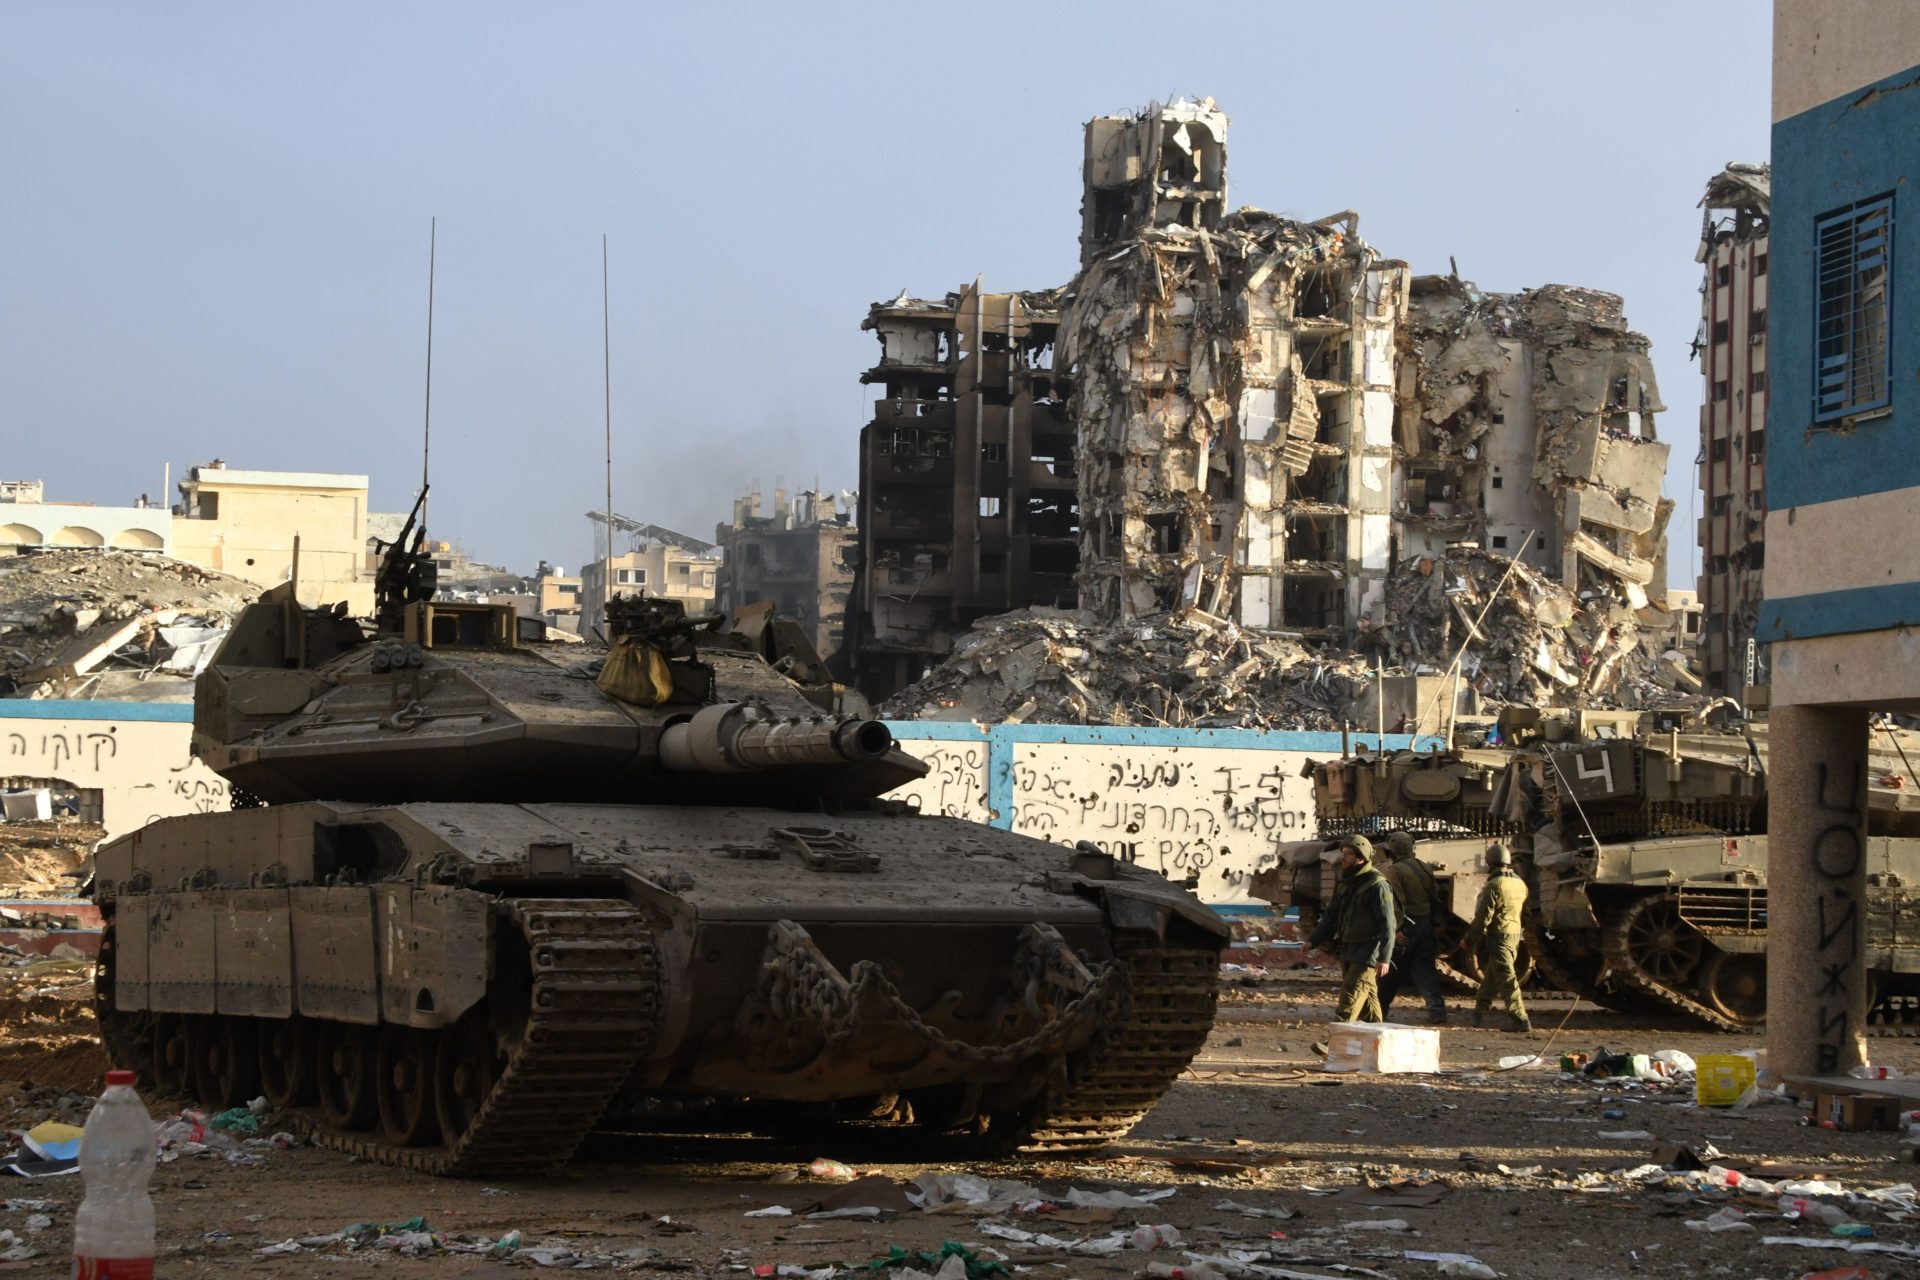 Israeli Defence Forces advancing in the Gaza Strip in a tank with a destroyed building prominent in the background